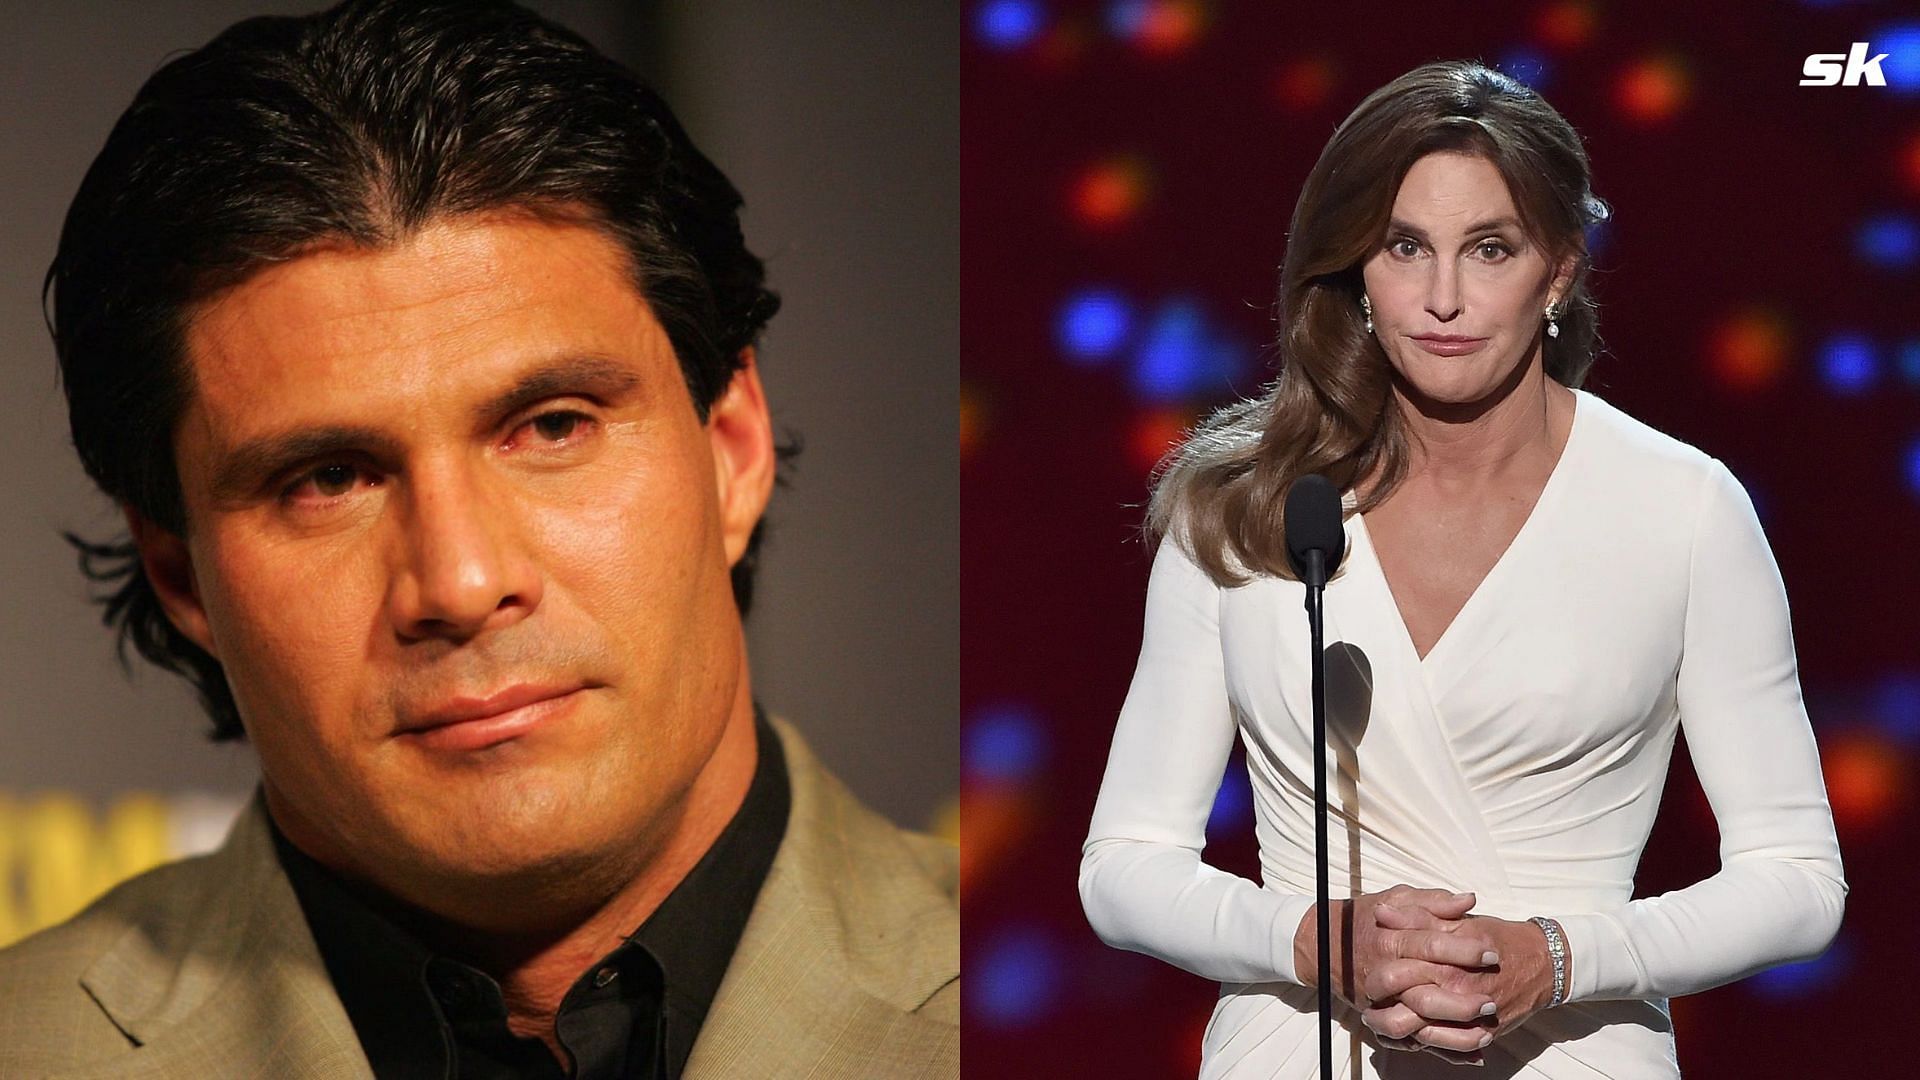 Jose Canseco to live as a woman in support of Caitlyn Jenner. This